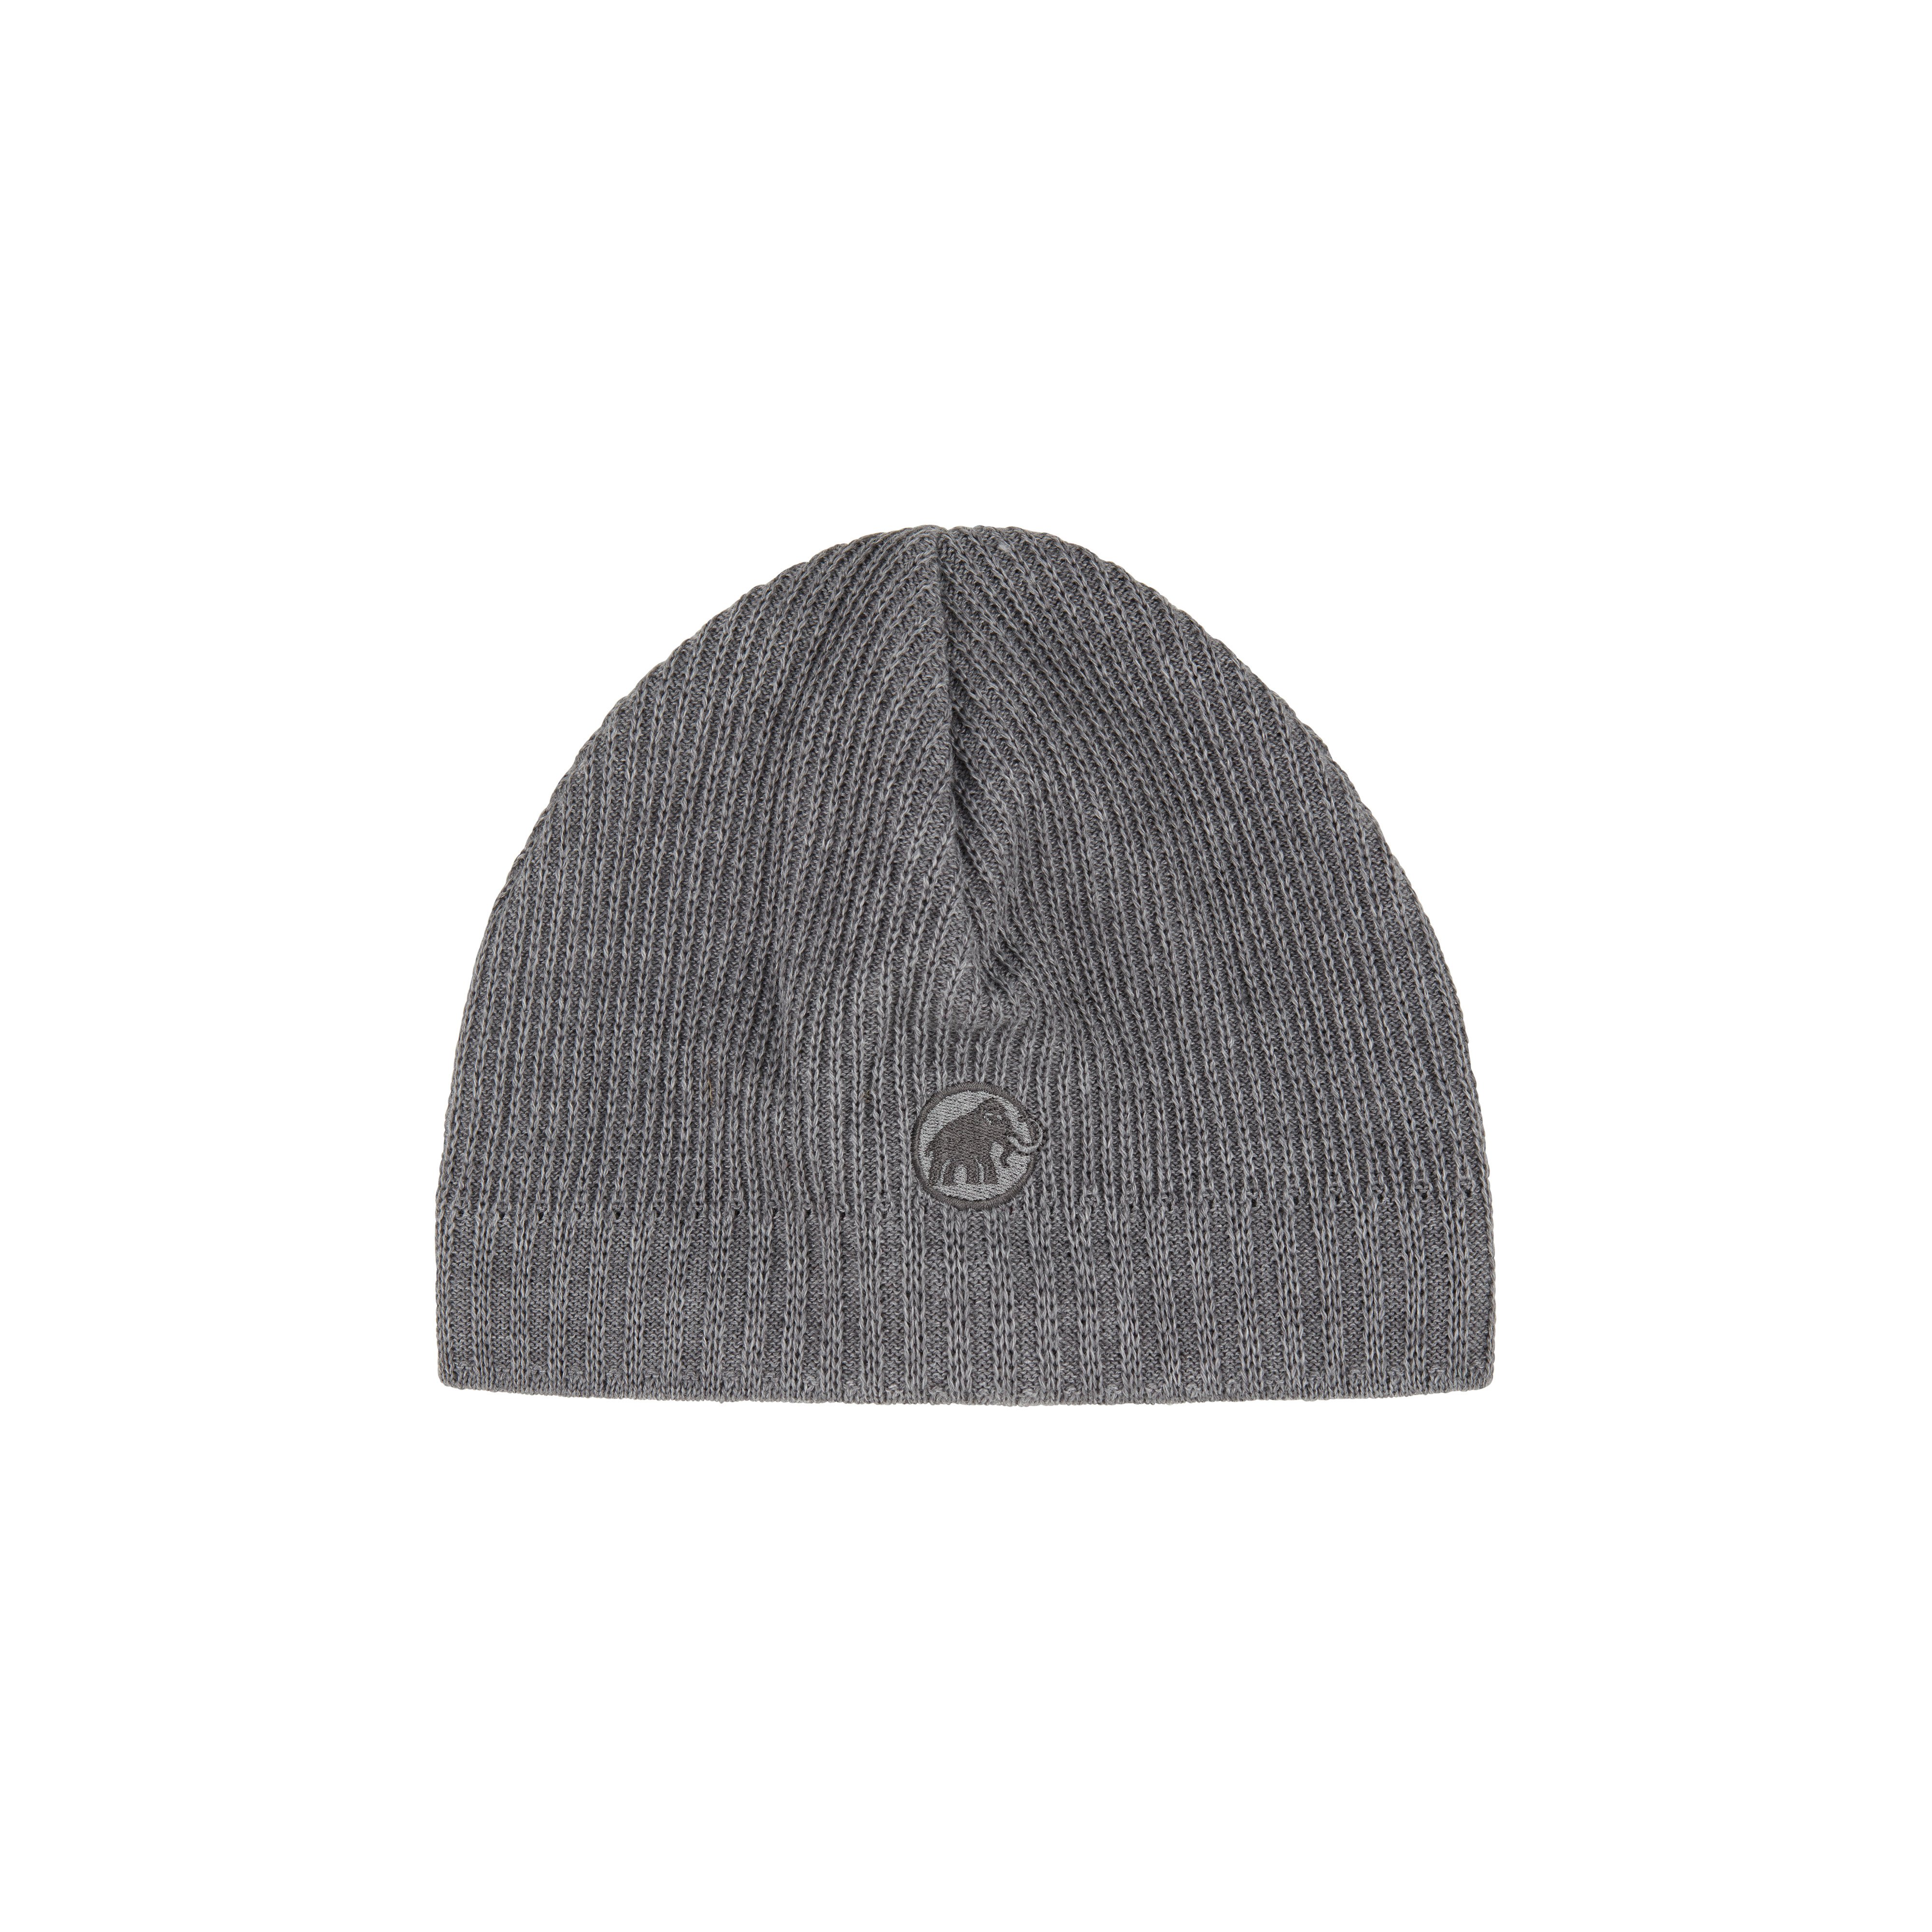 Sublime Beanie - alloy, one size product image